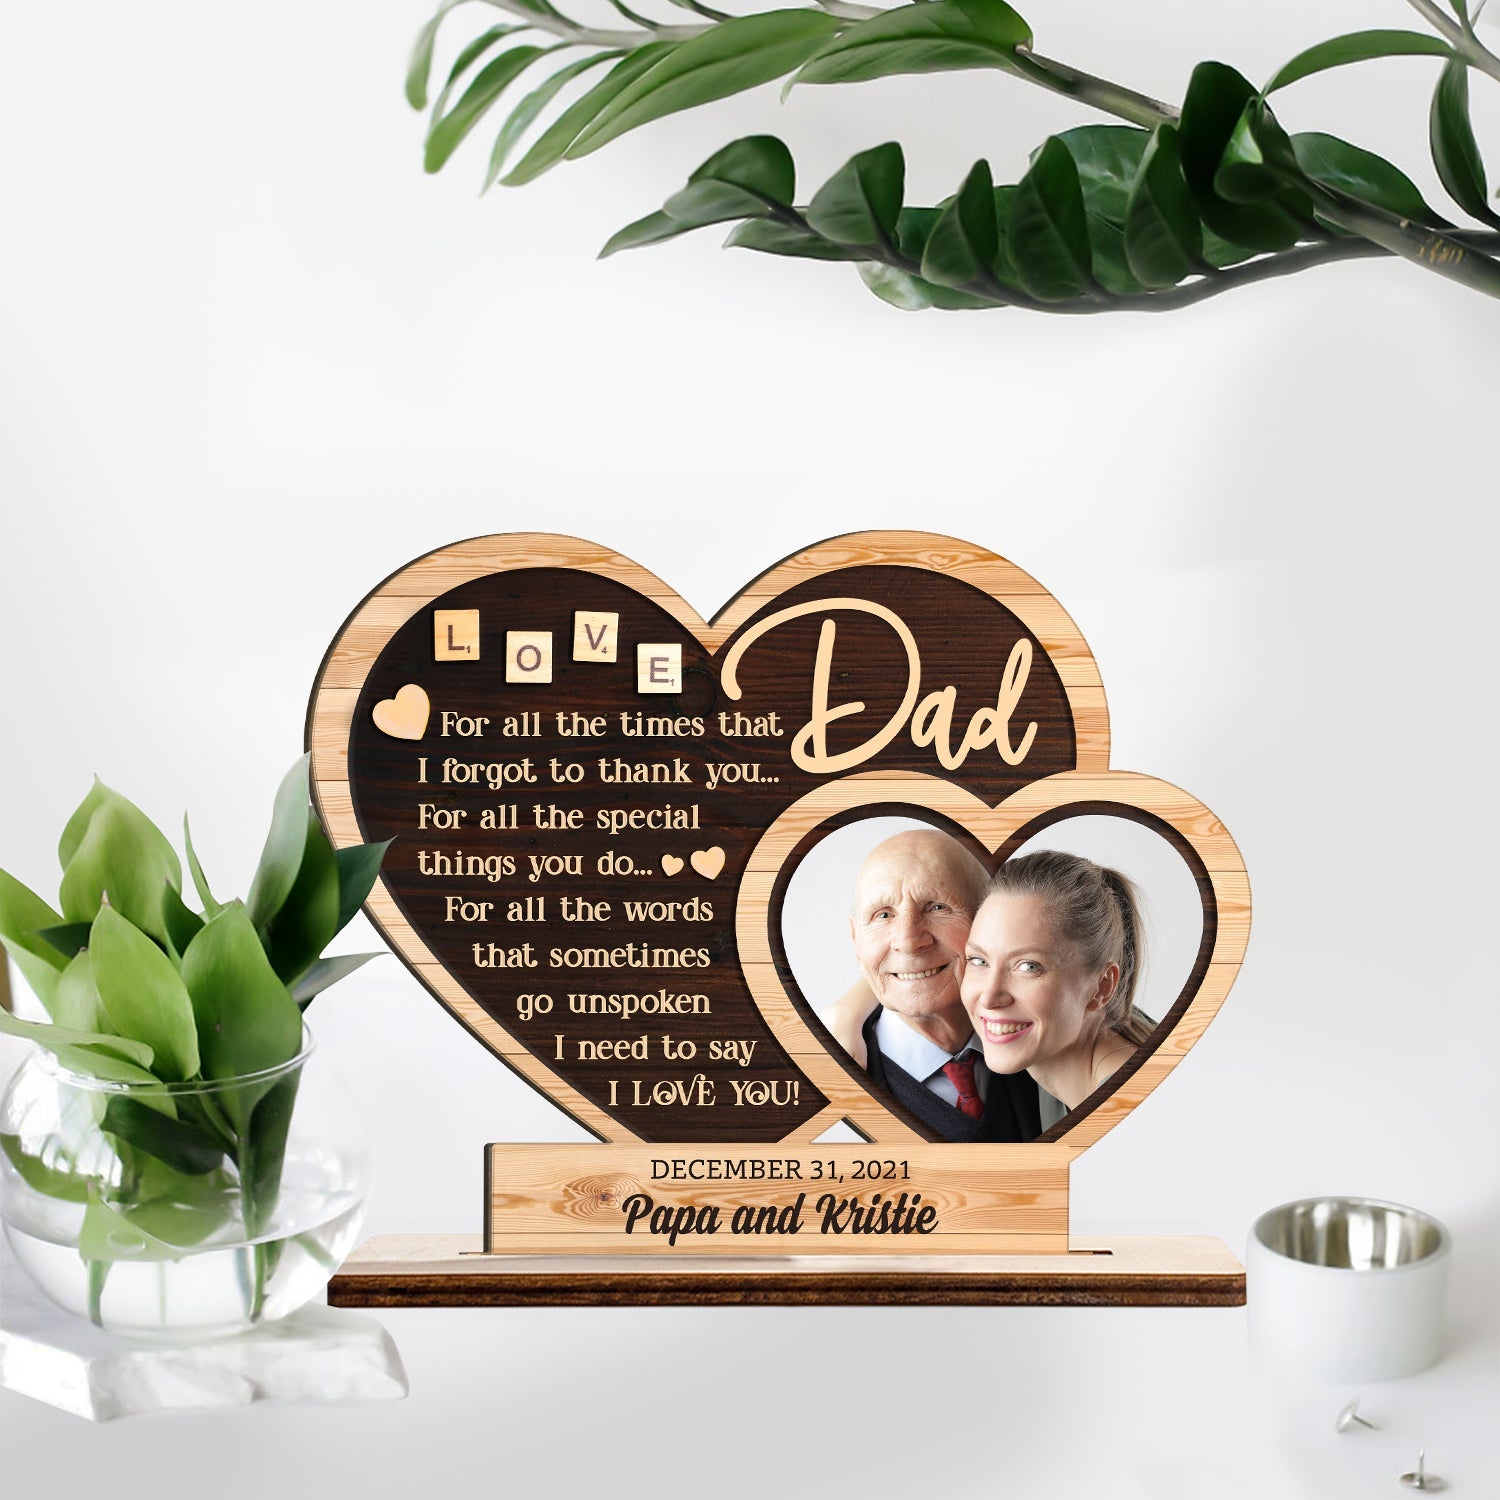 Personalized Wooden Engraving Gift | Engraved Wooden Plaque | Giftify